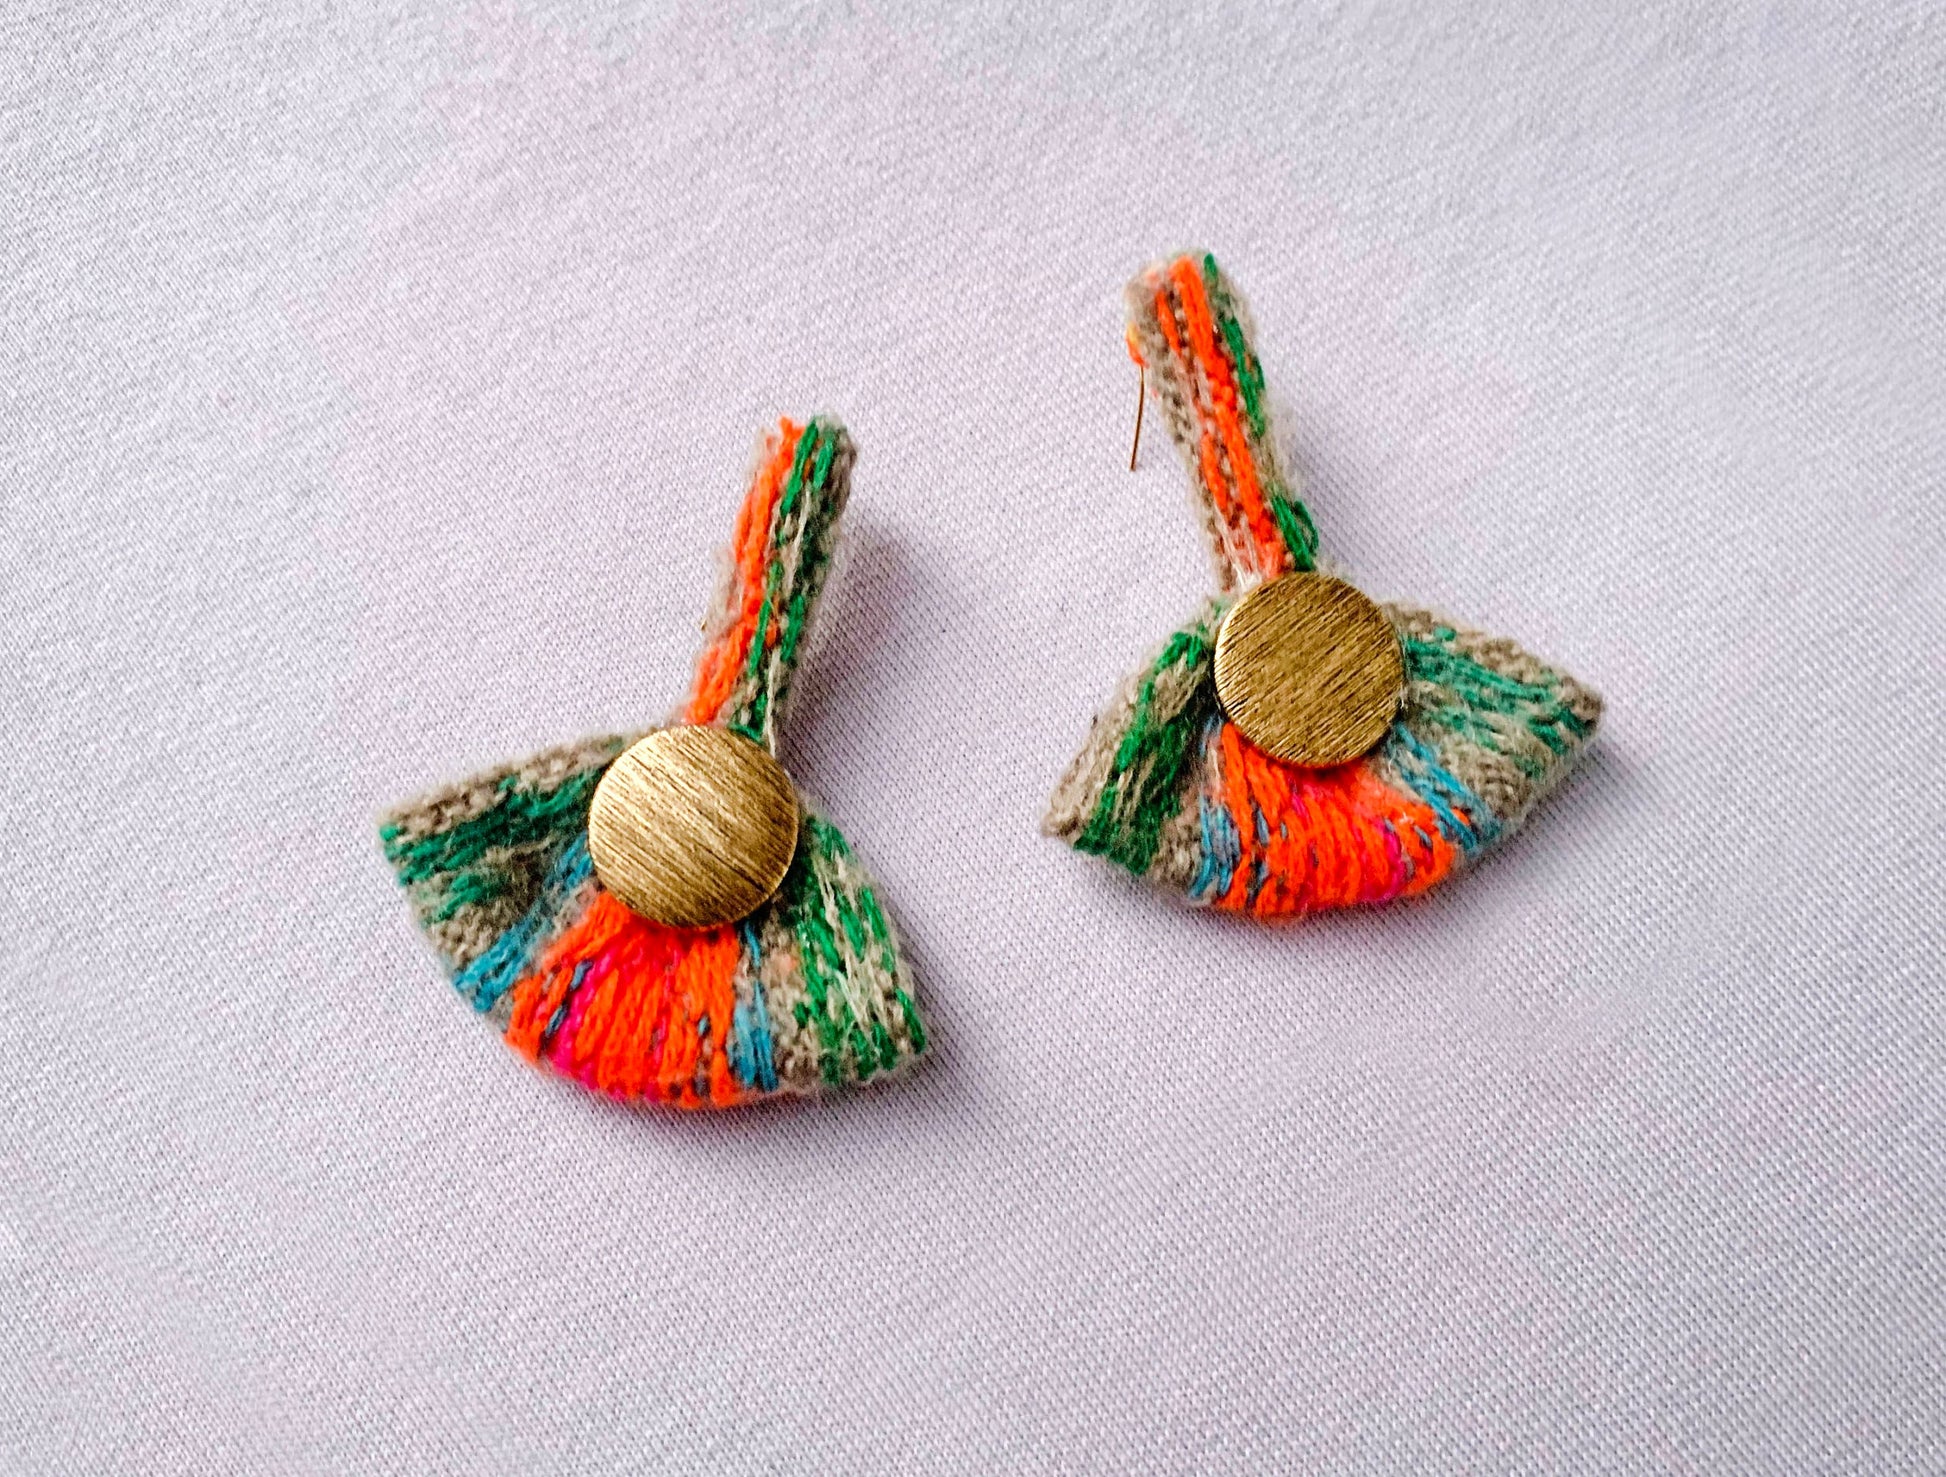 Recycled Sweater Dangles! Earrings from Recycled Sweater & vintage buttons